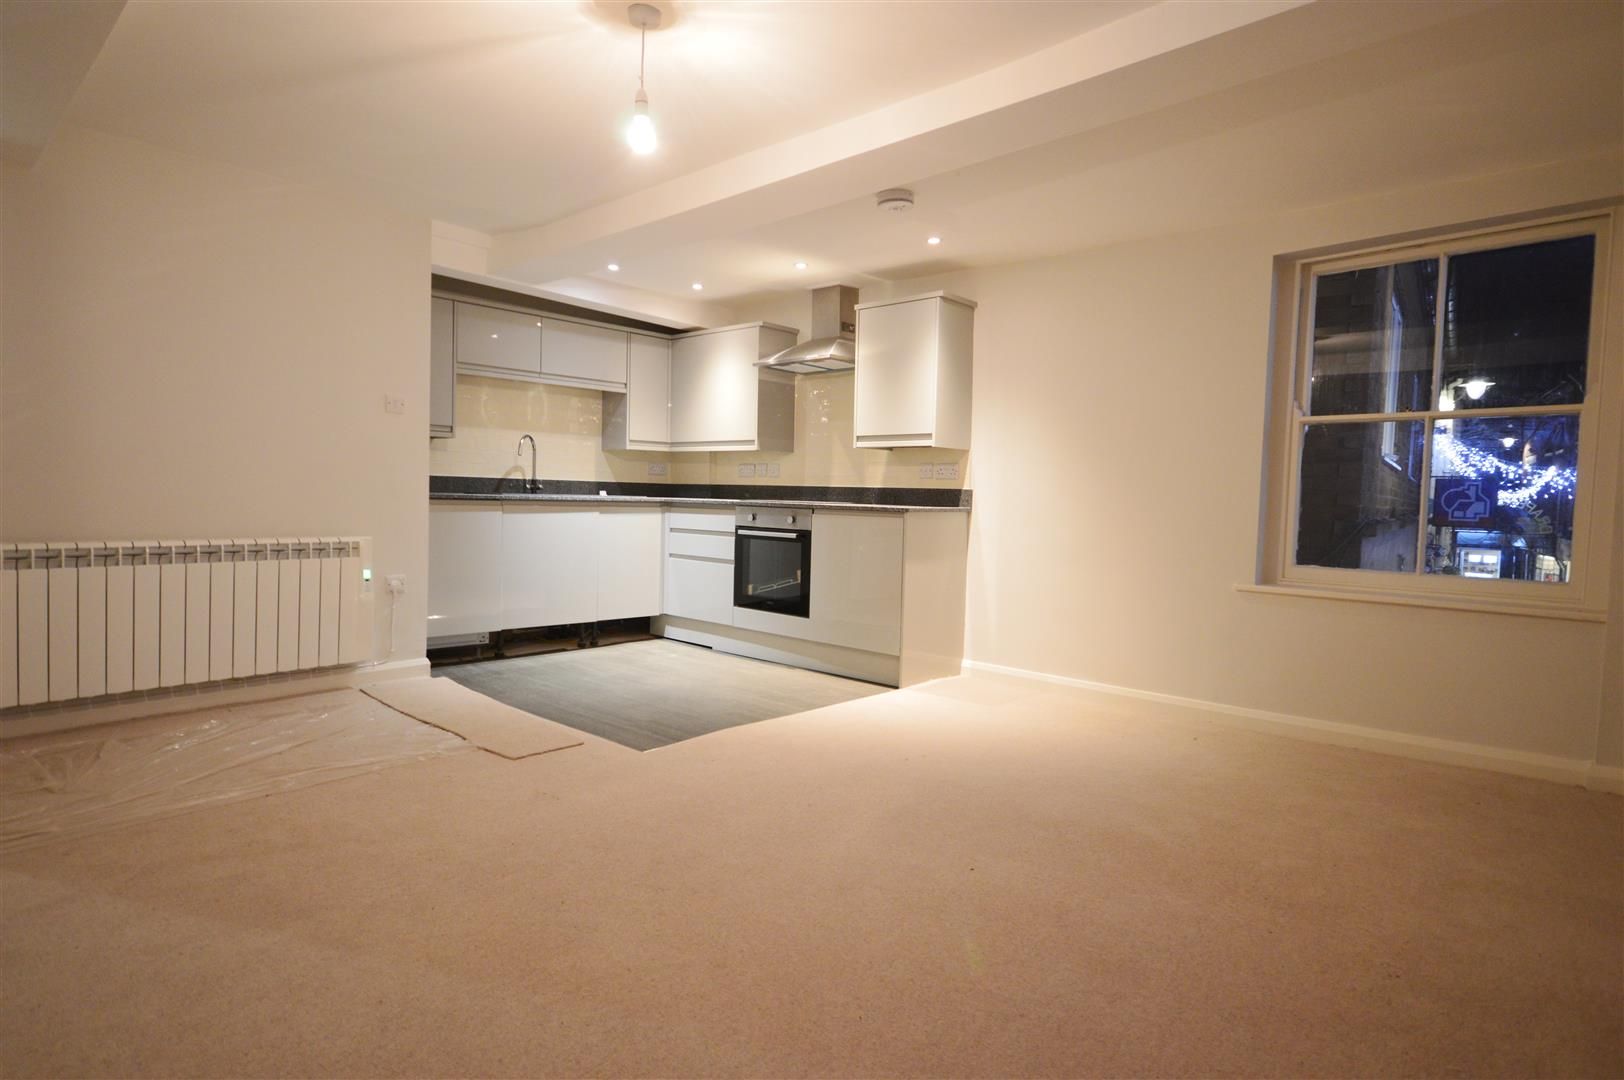 2 bed flat to rent high wycombe